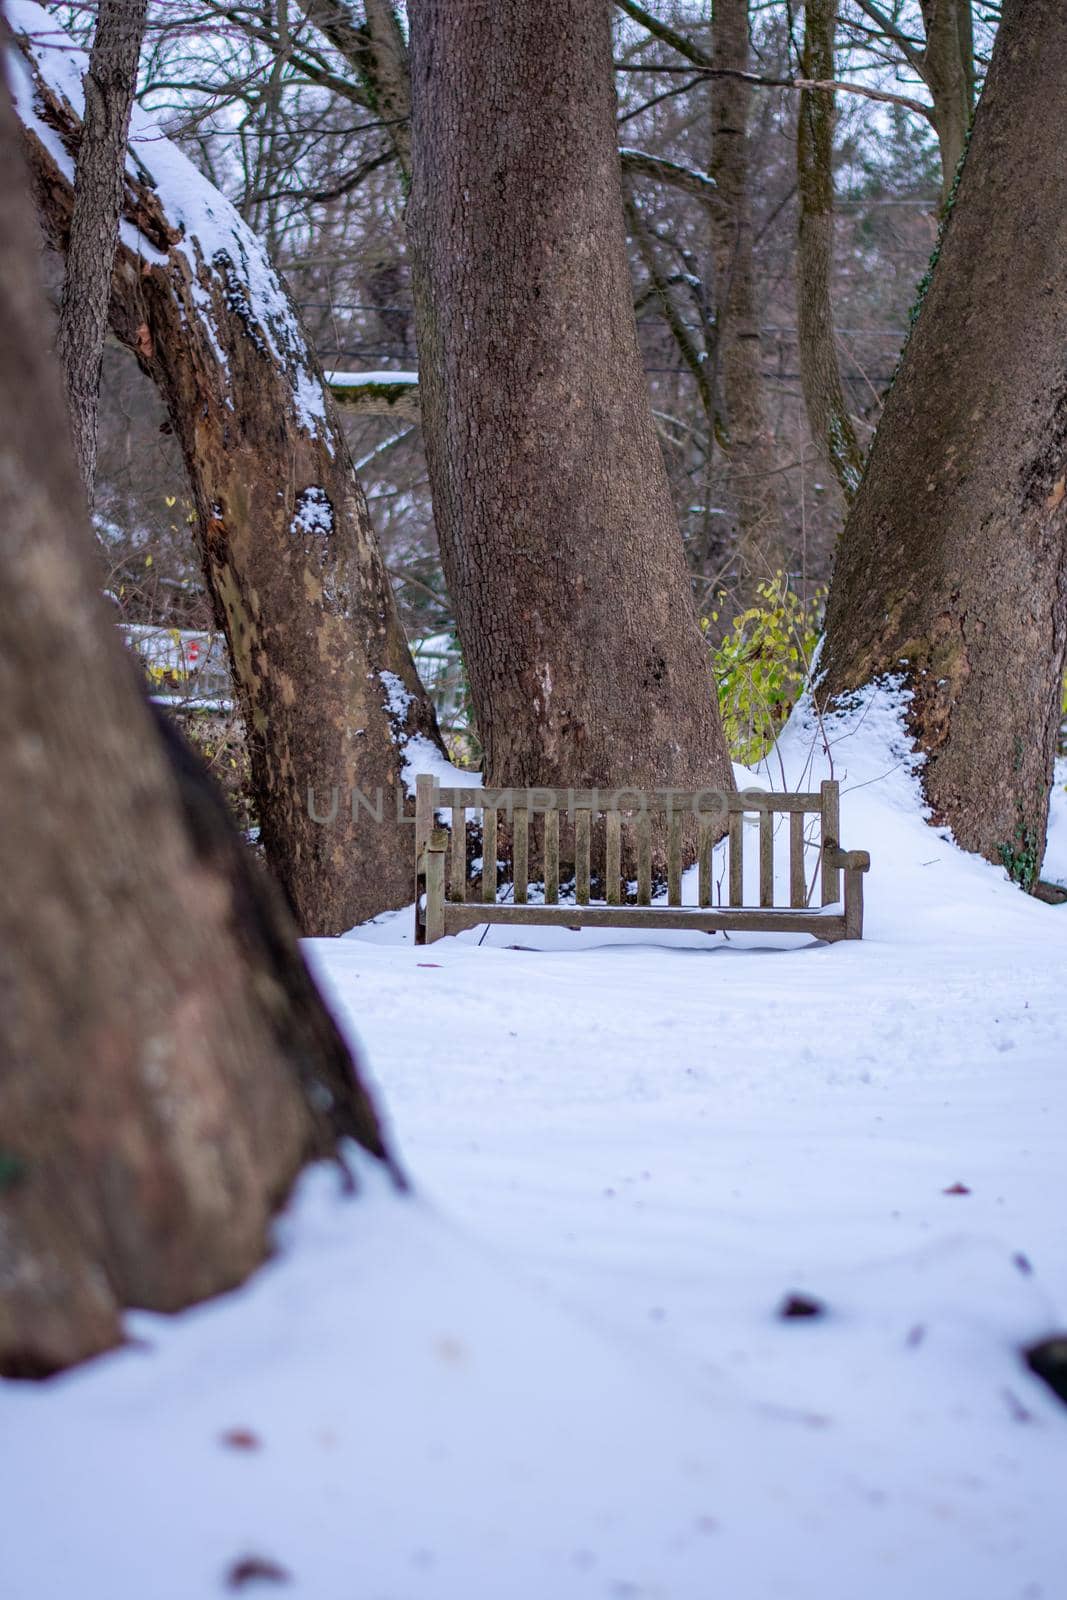 A Wooden Park Bench Next to a Tree In a Park Covered in Snow